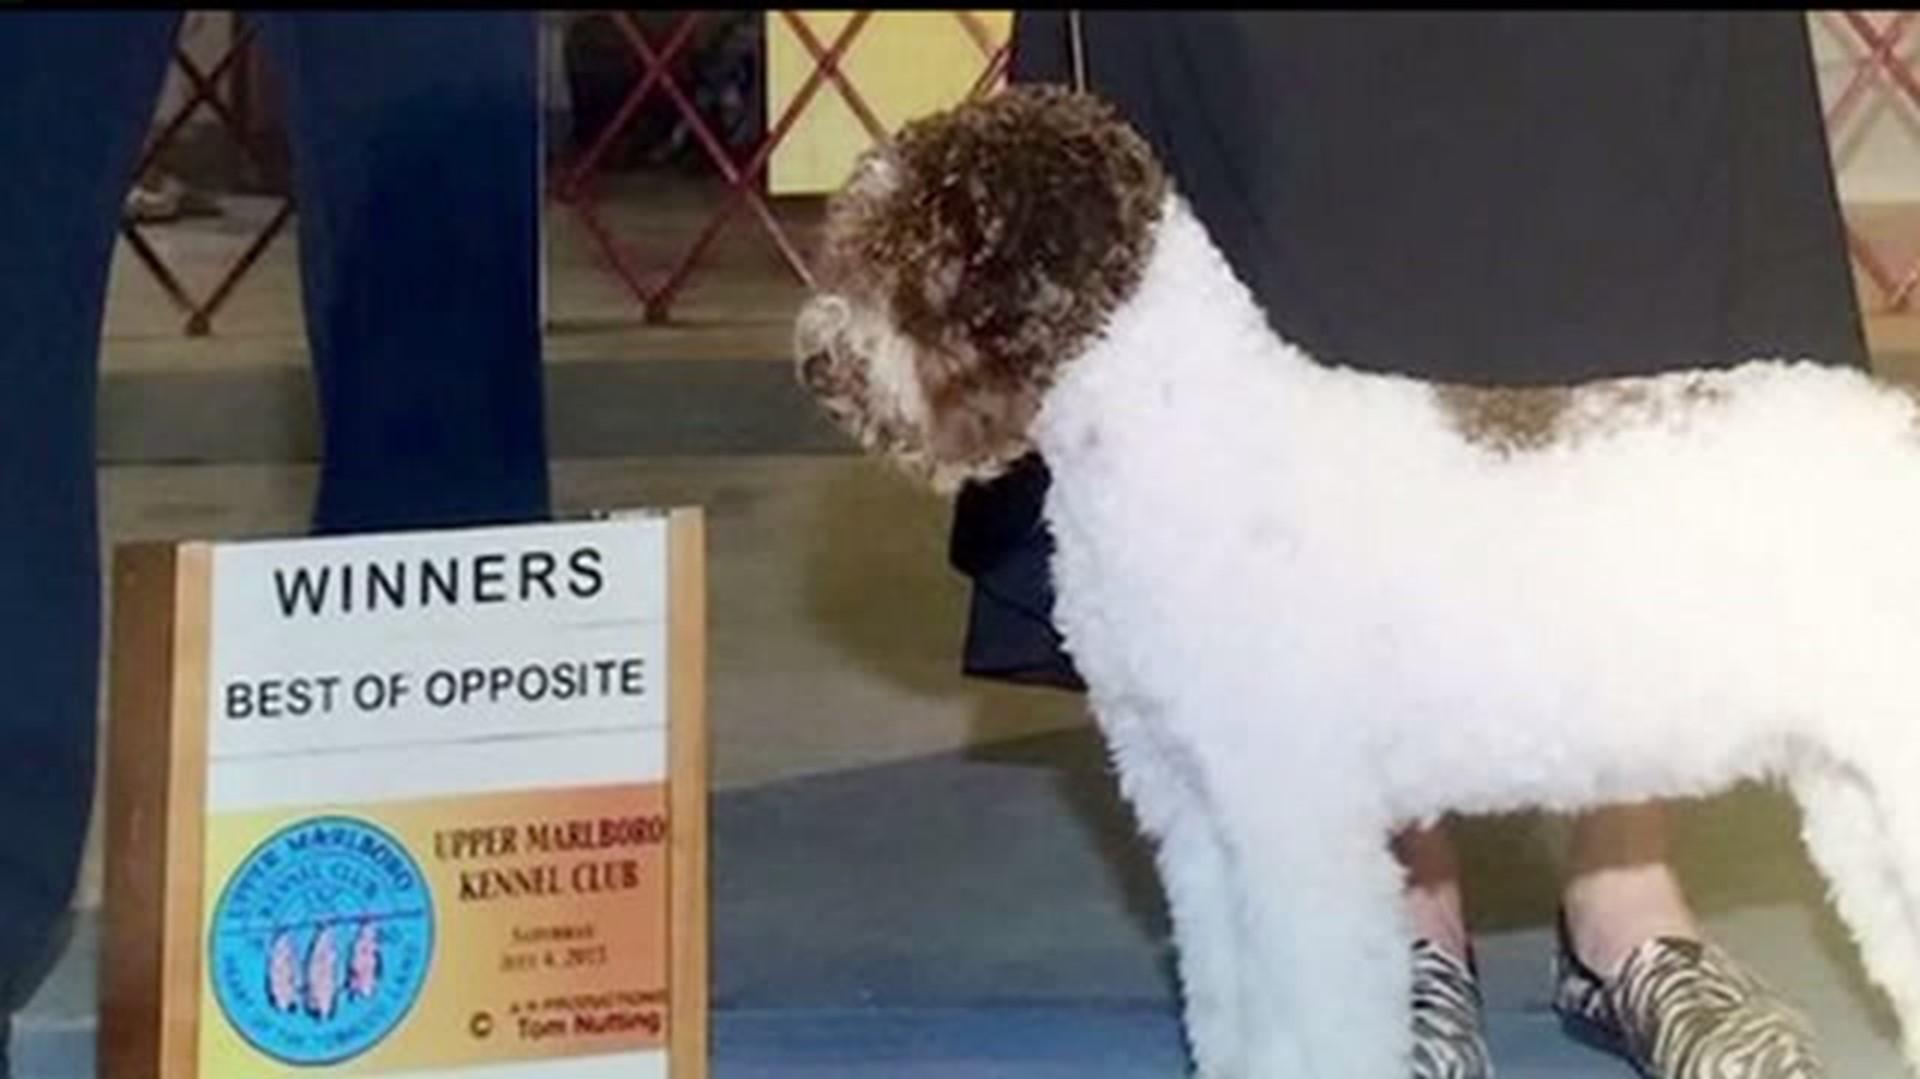 Lancaster County Woman Brings Back Awards From Westminster Kennel